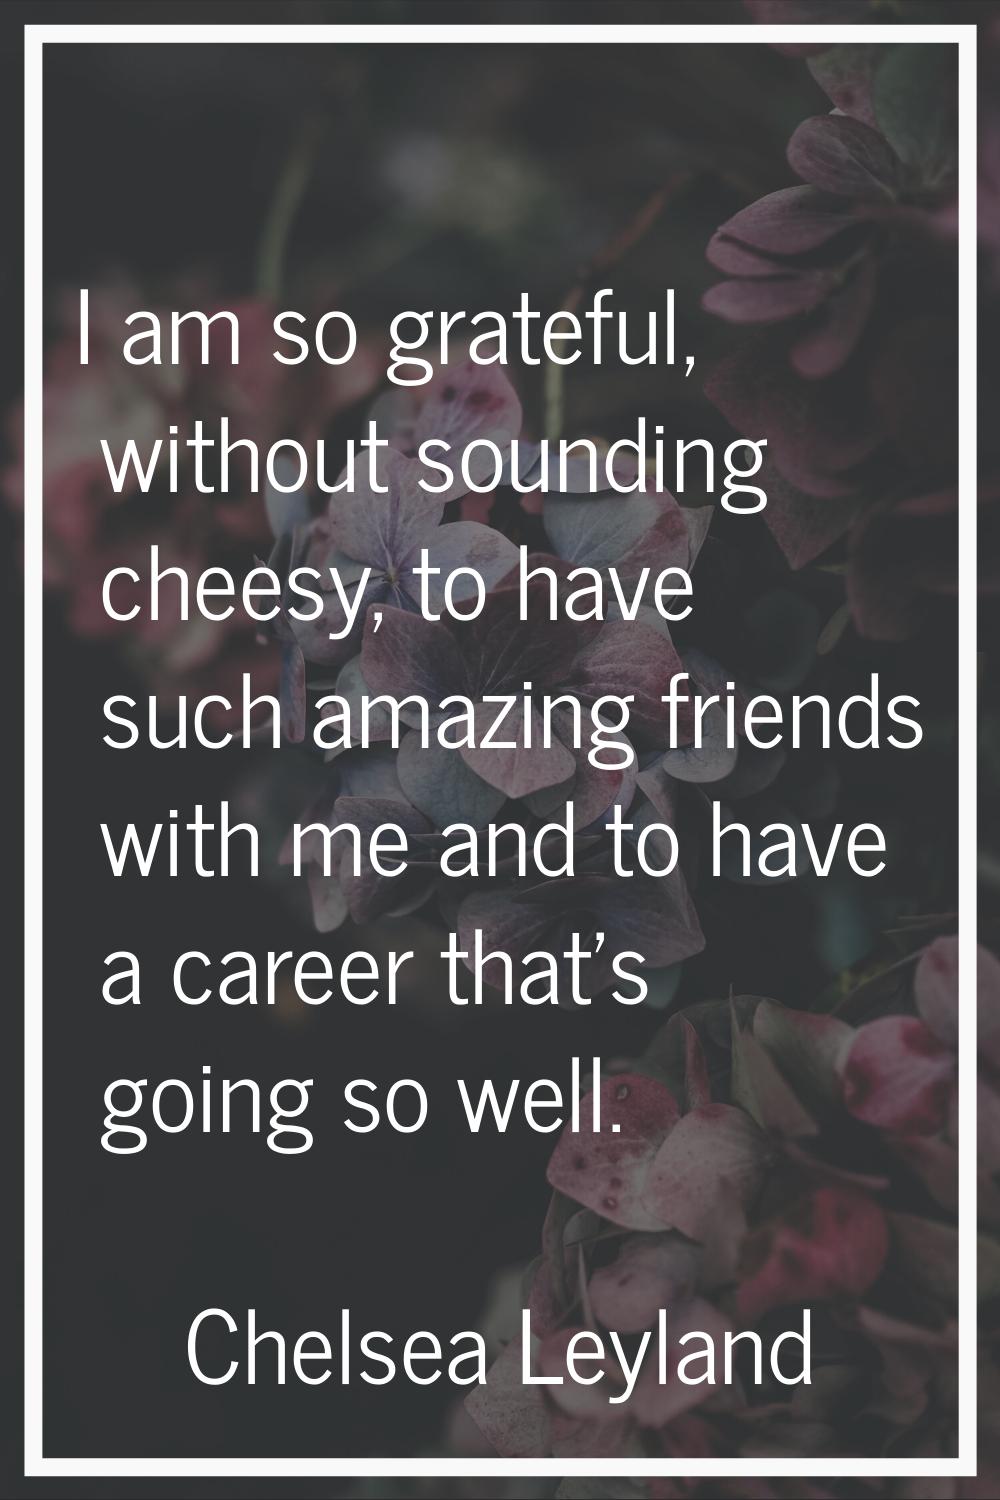 I am so grateful, without sounding cheesy, to have such amazing friends with me and to have a caree